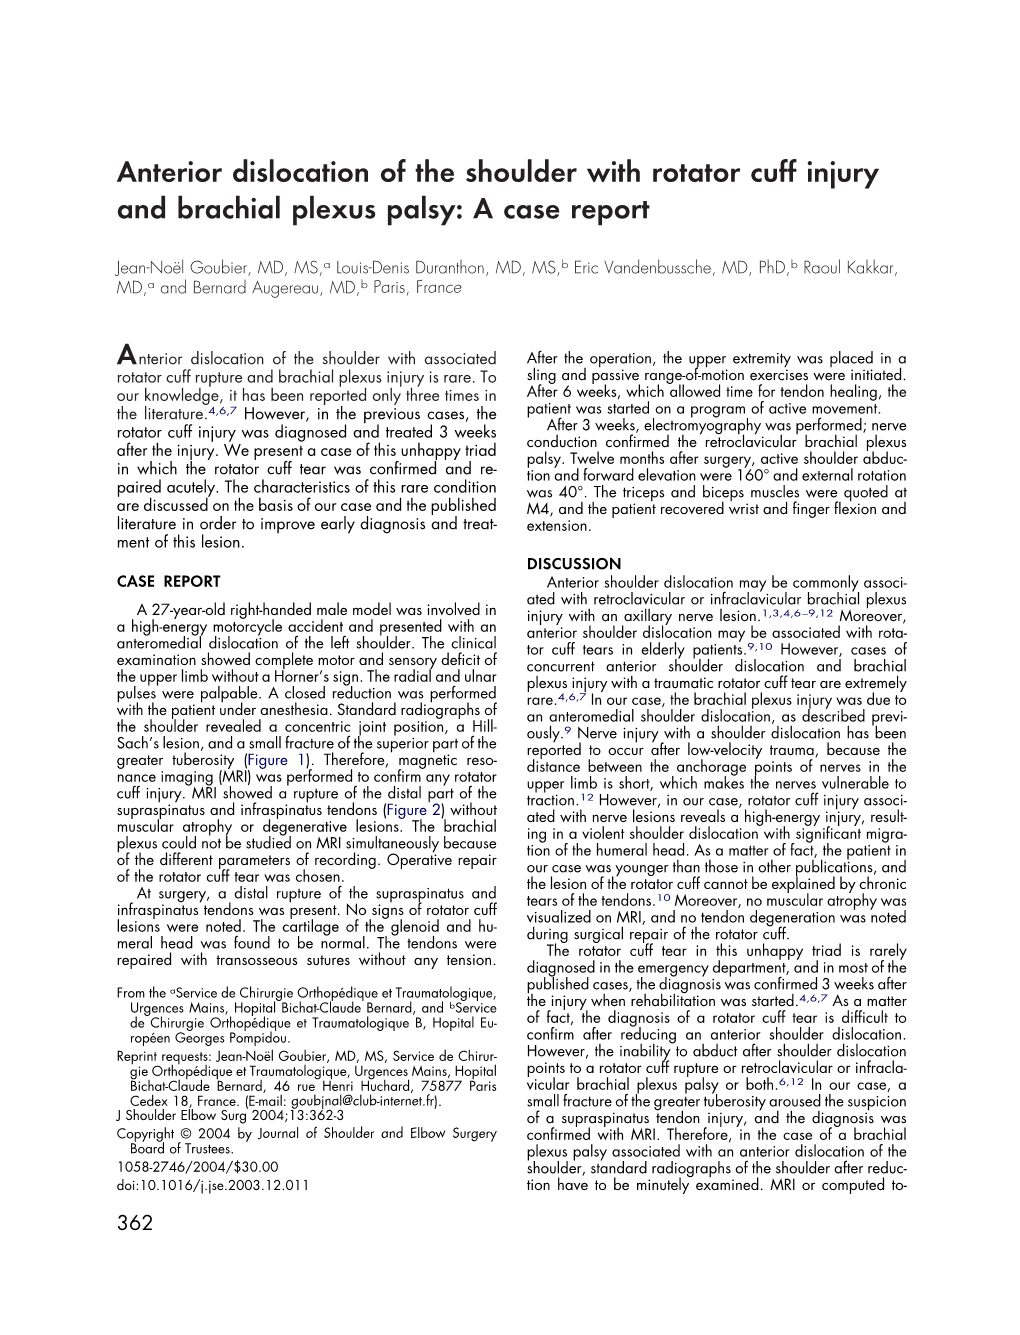 Anterior Dislocation of the Shoulder with Rotator Cuff Injury and Brachial Plexus Palsy: a Case Report